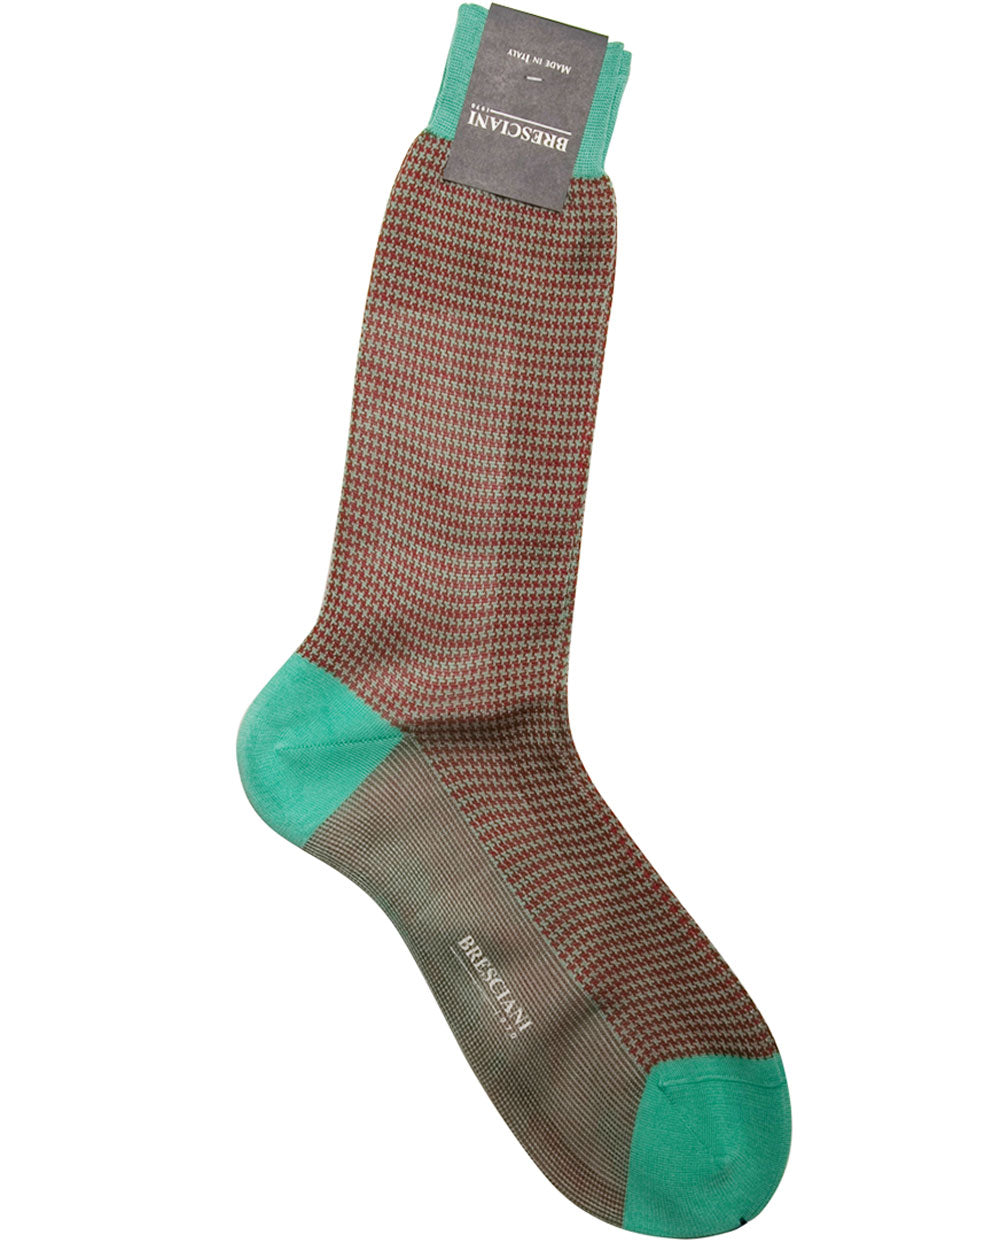 Red and Mint Houndstooth Midcalf Sock